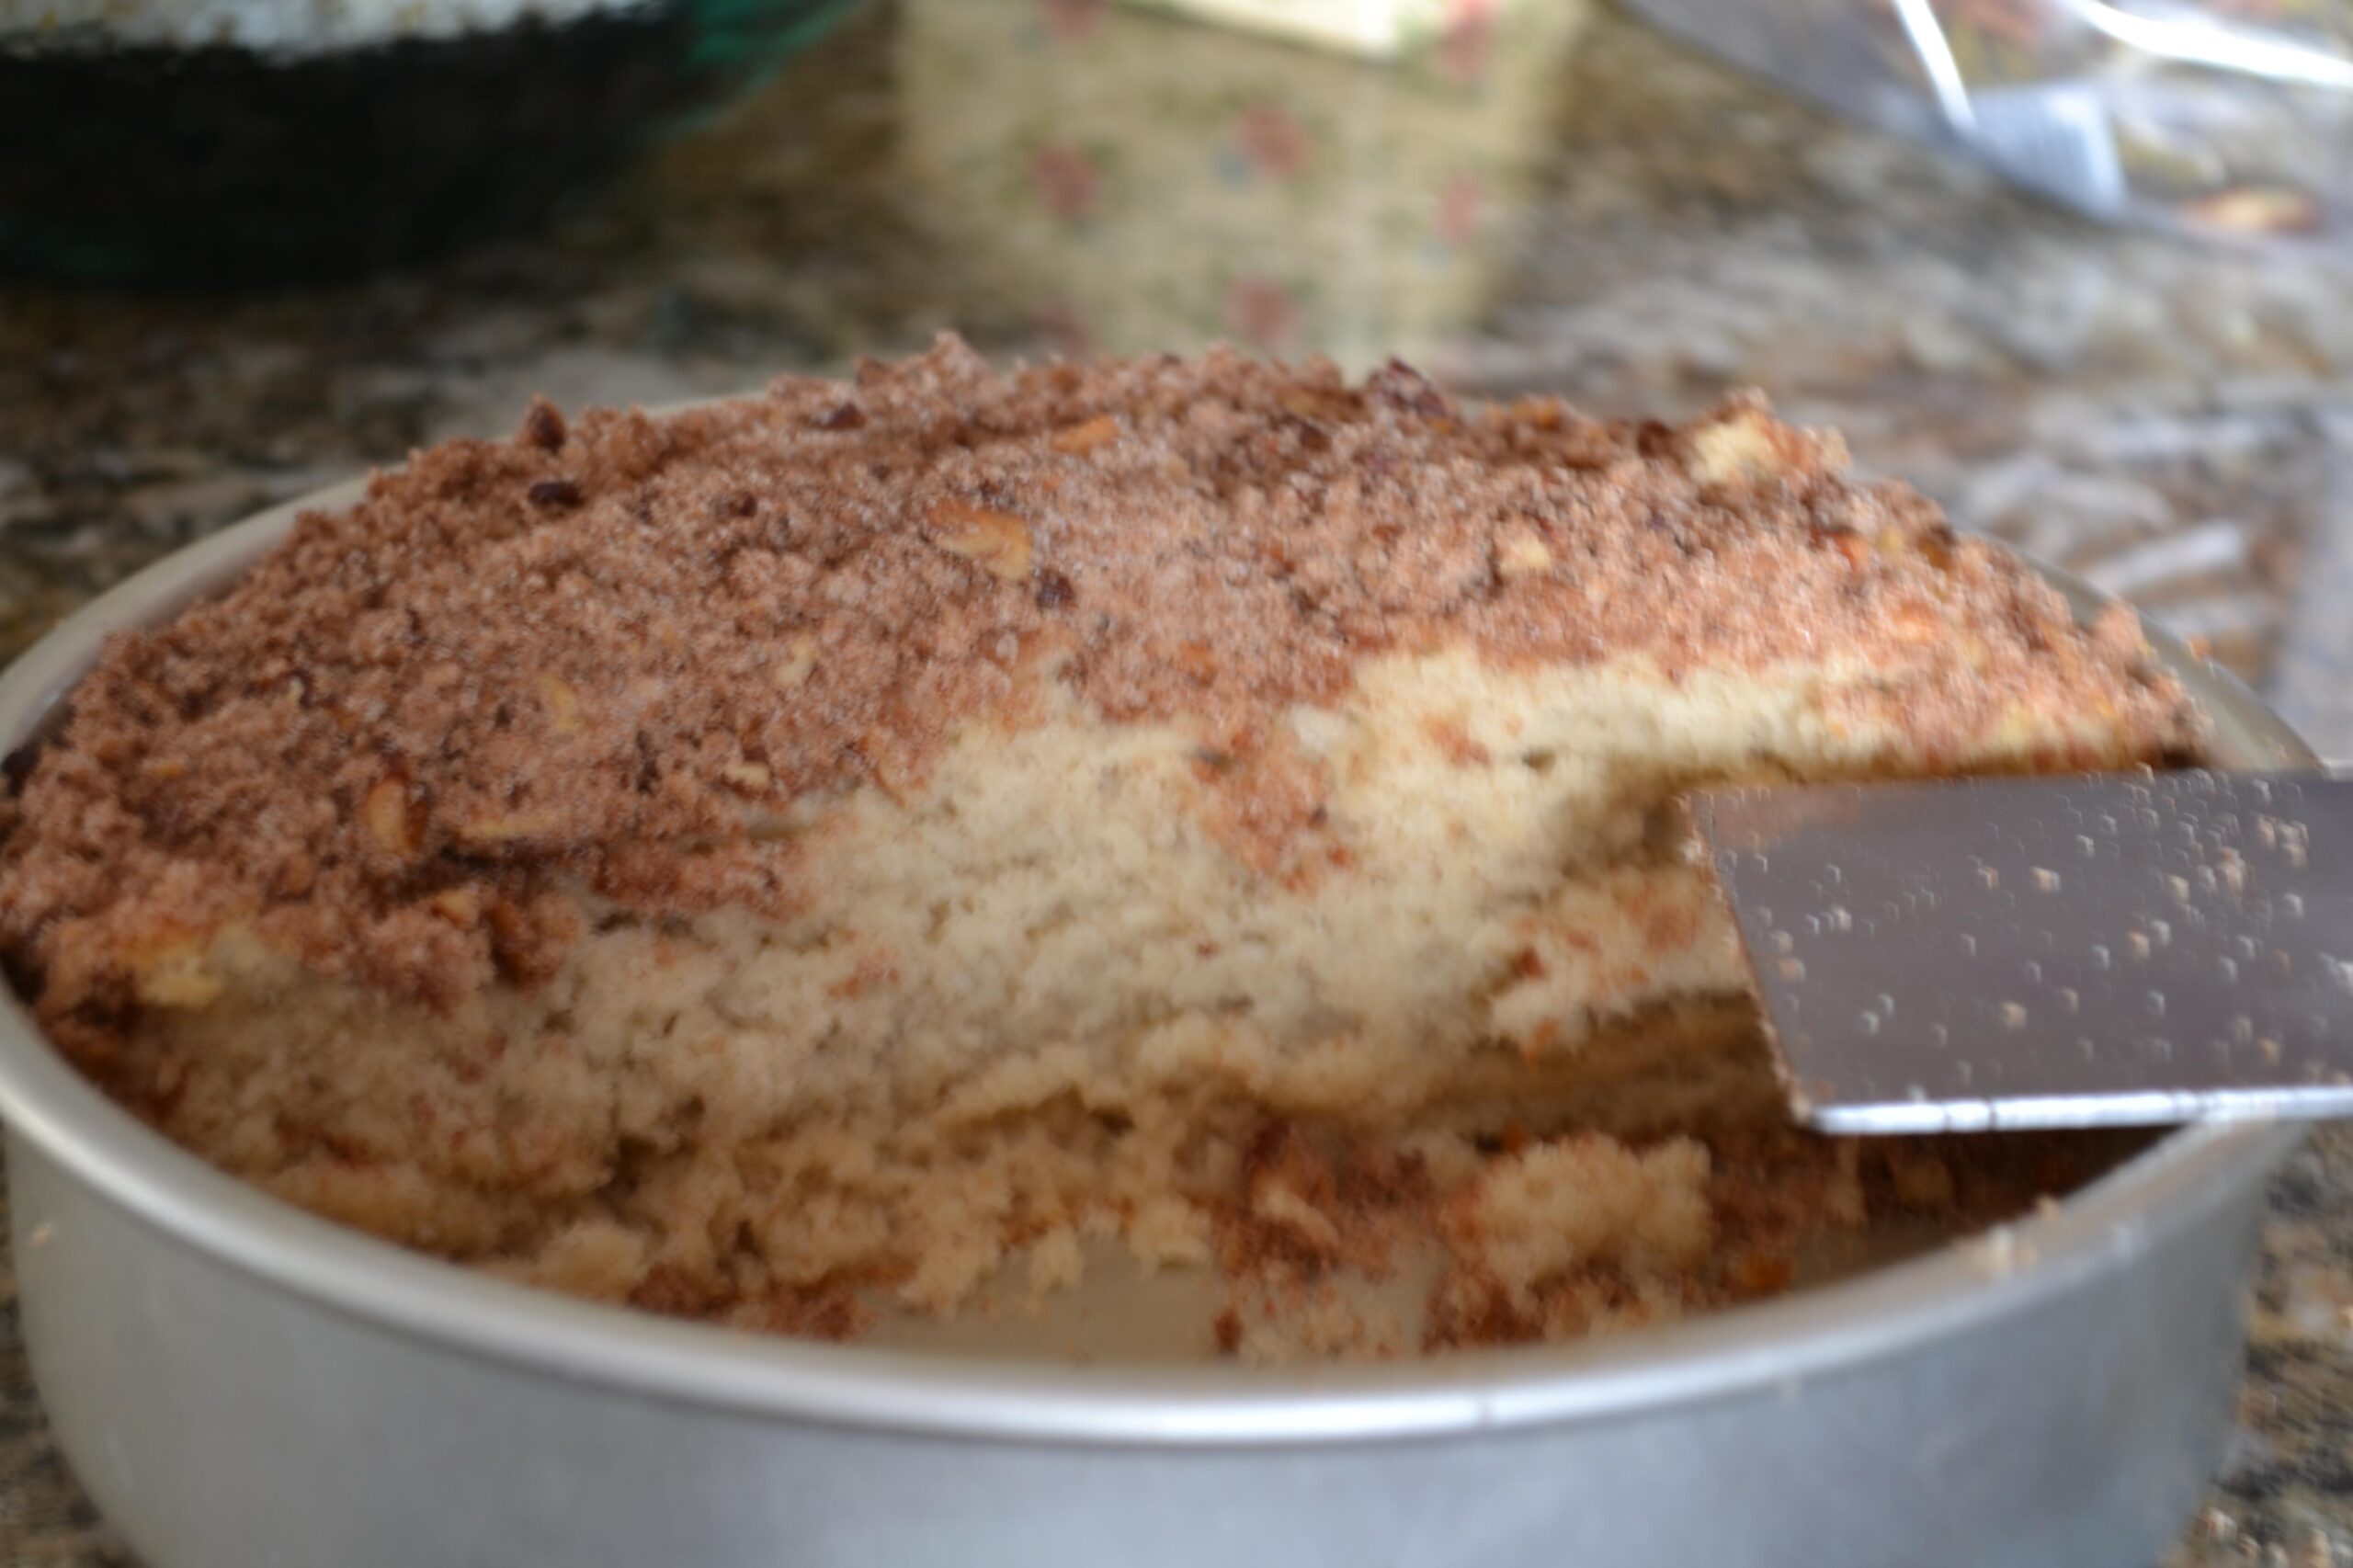  A warm slice of cinnamon coffee cake is calling your name!